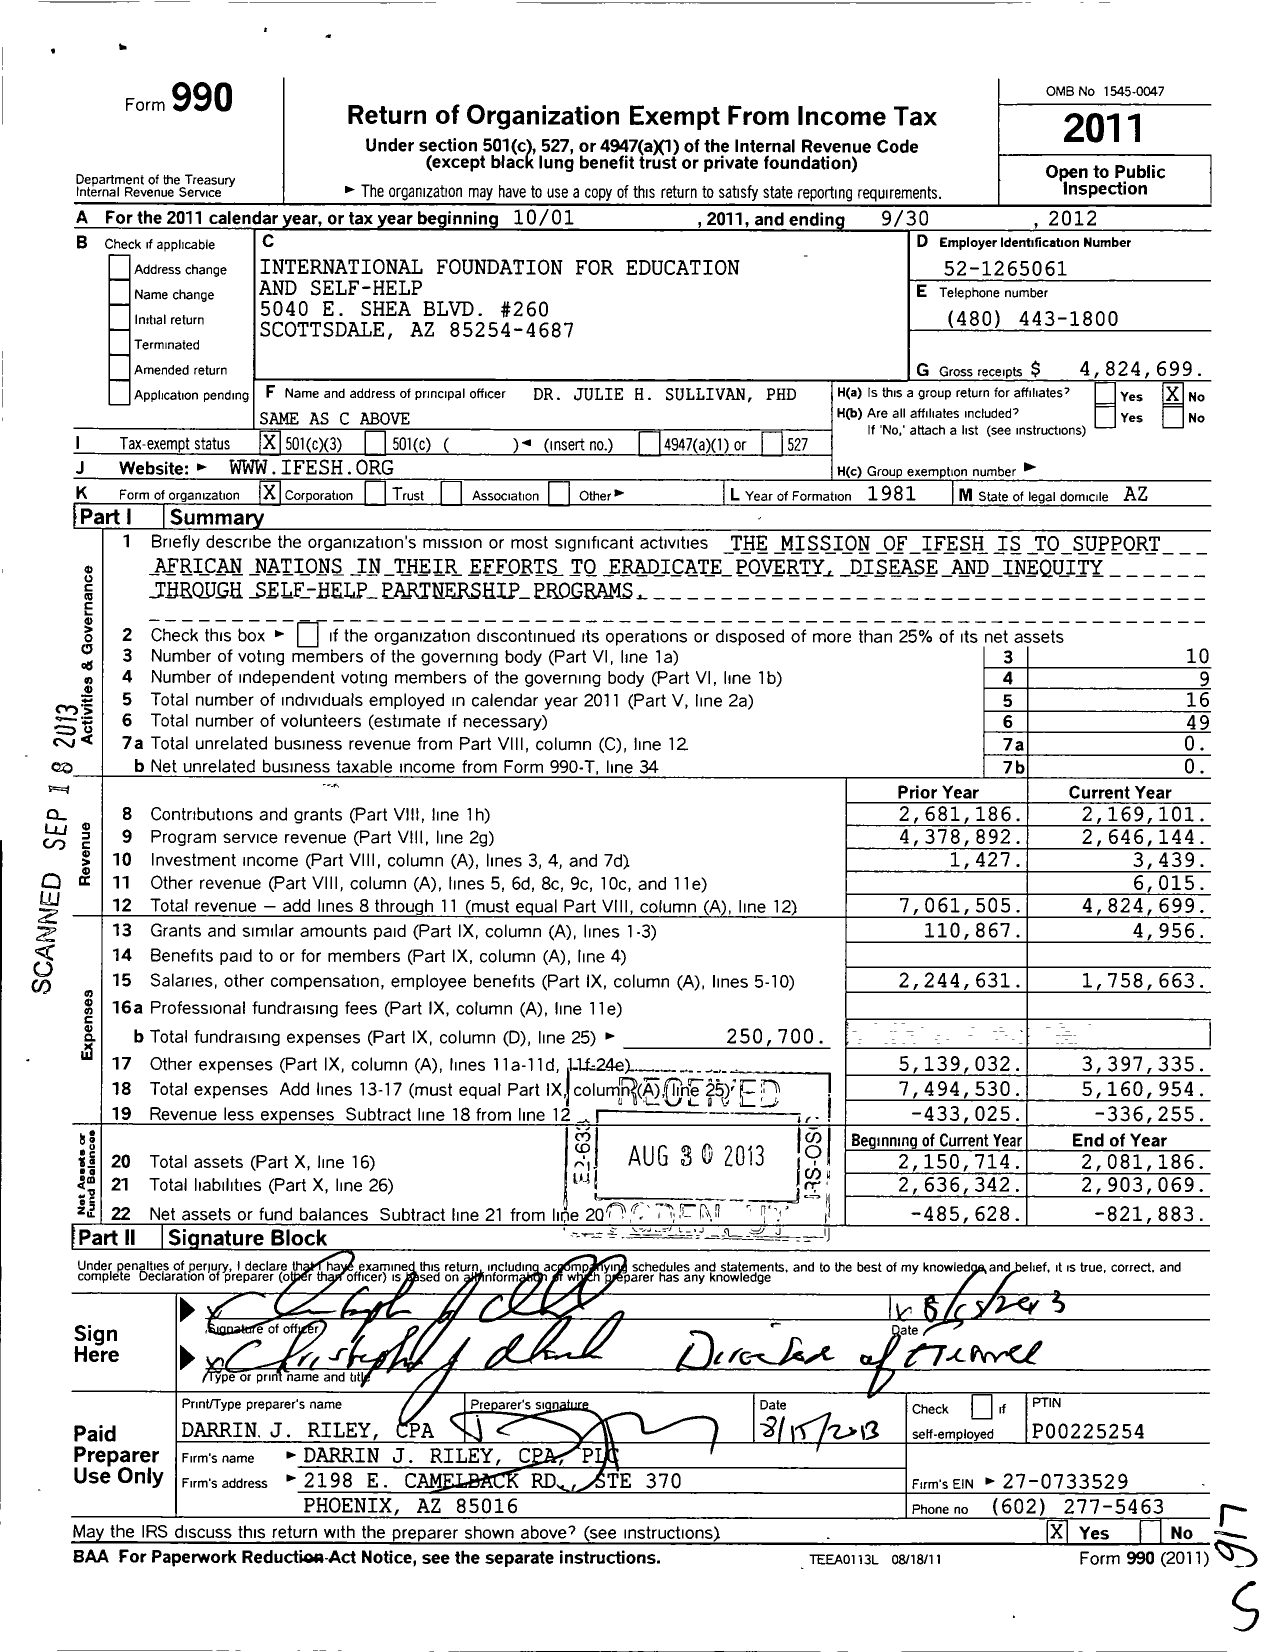 Image of first page of 2011 Form 990 for International Foundation for Education and Self-Help (IFESH)